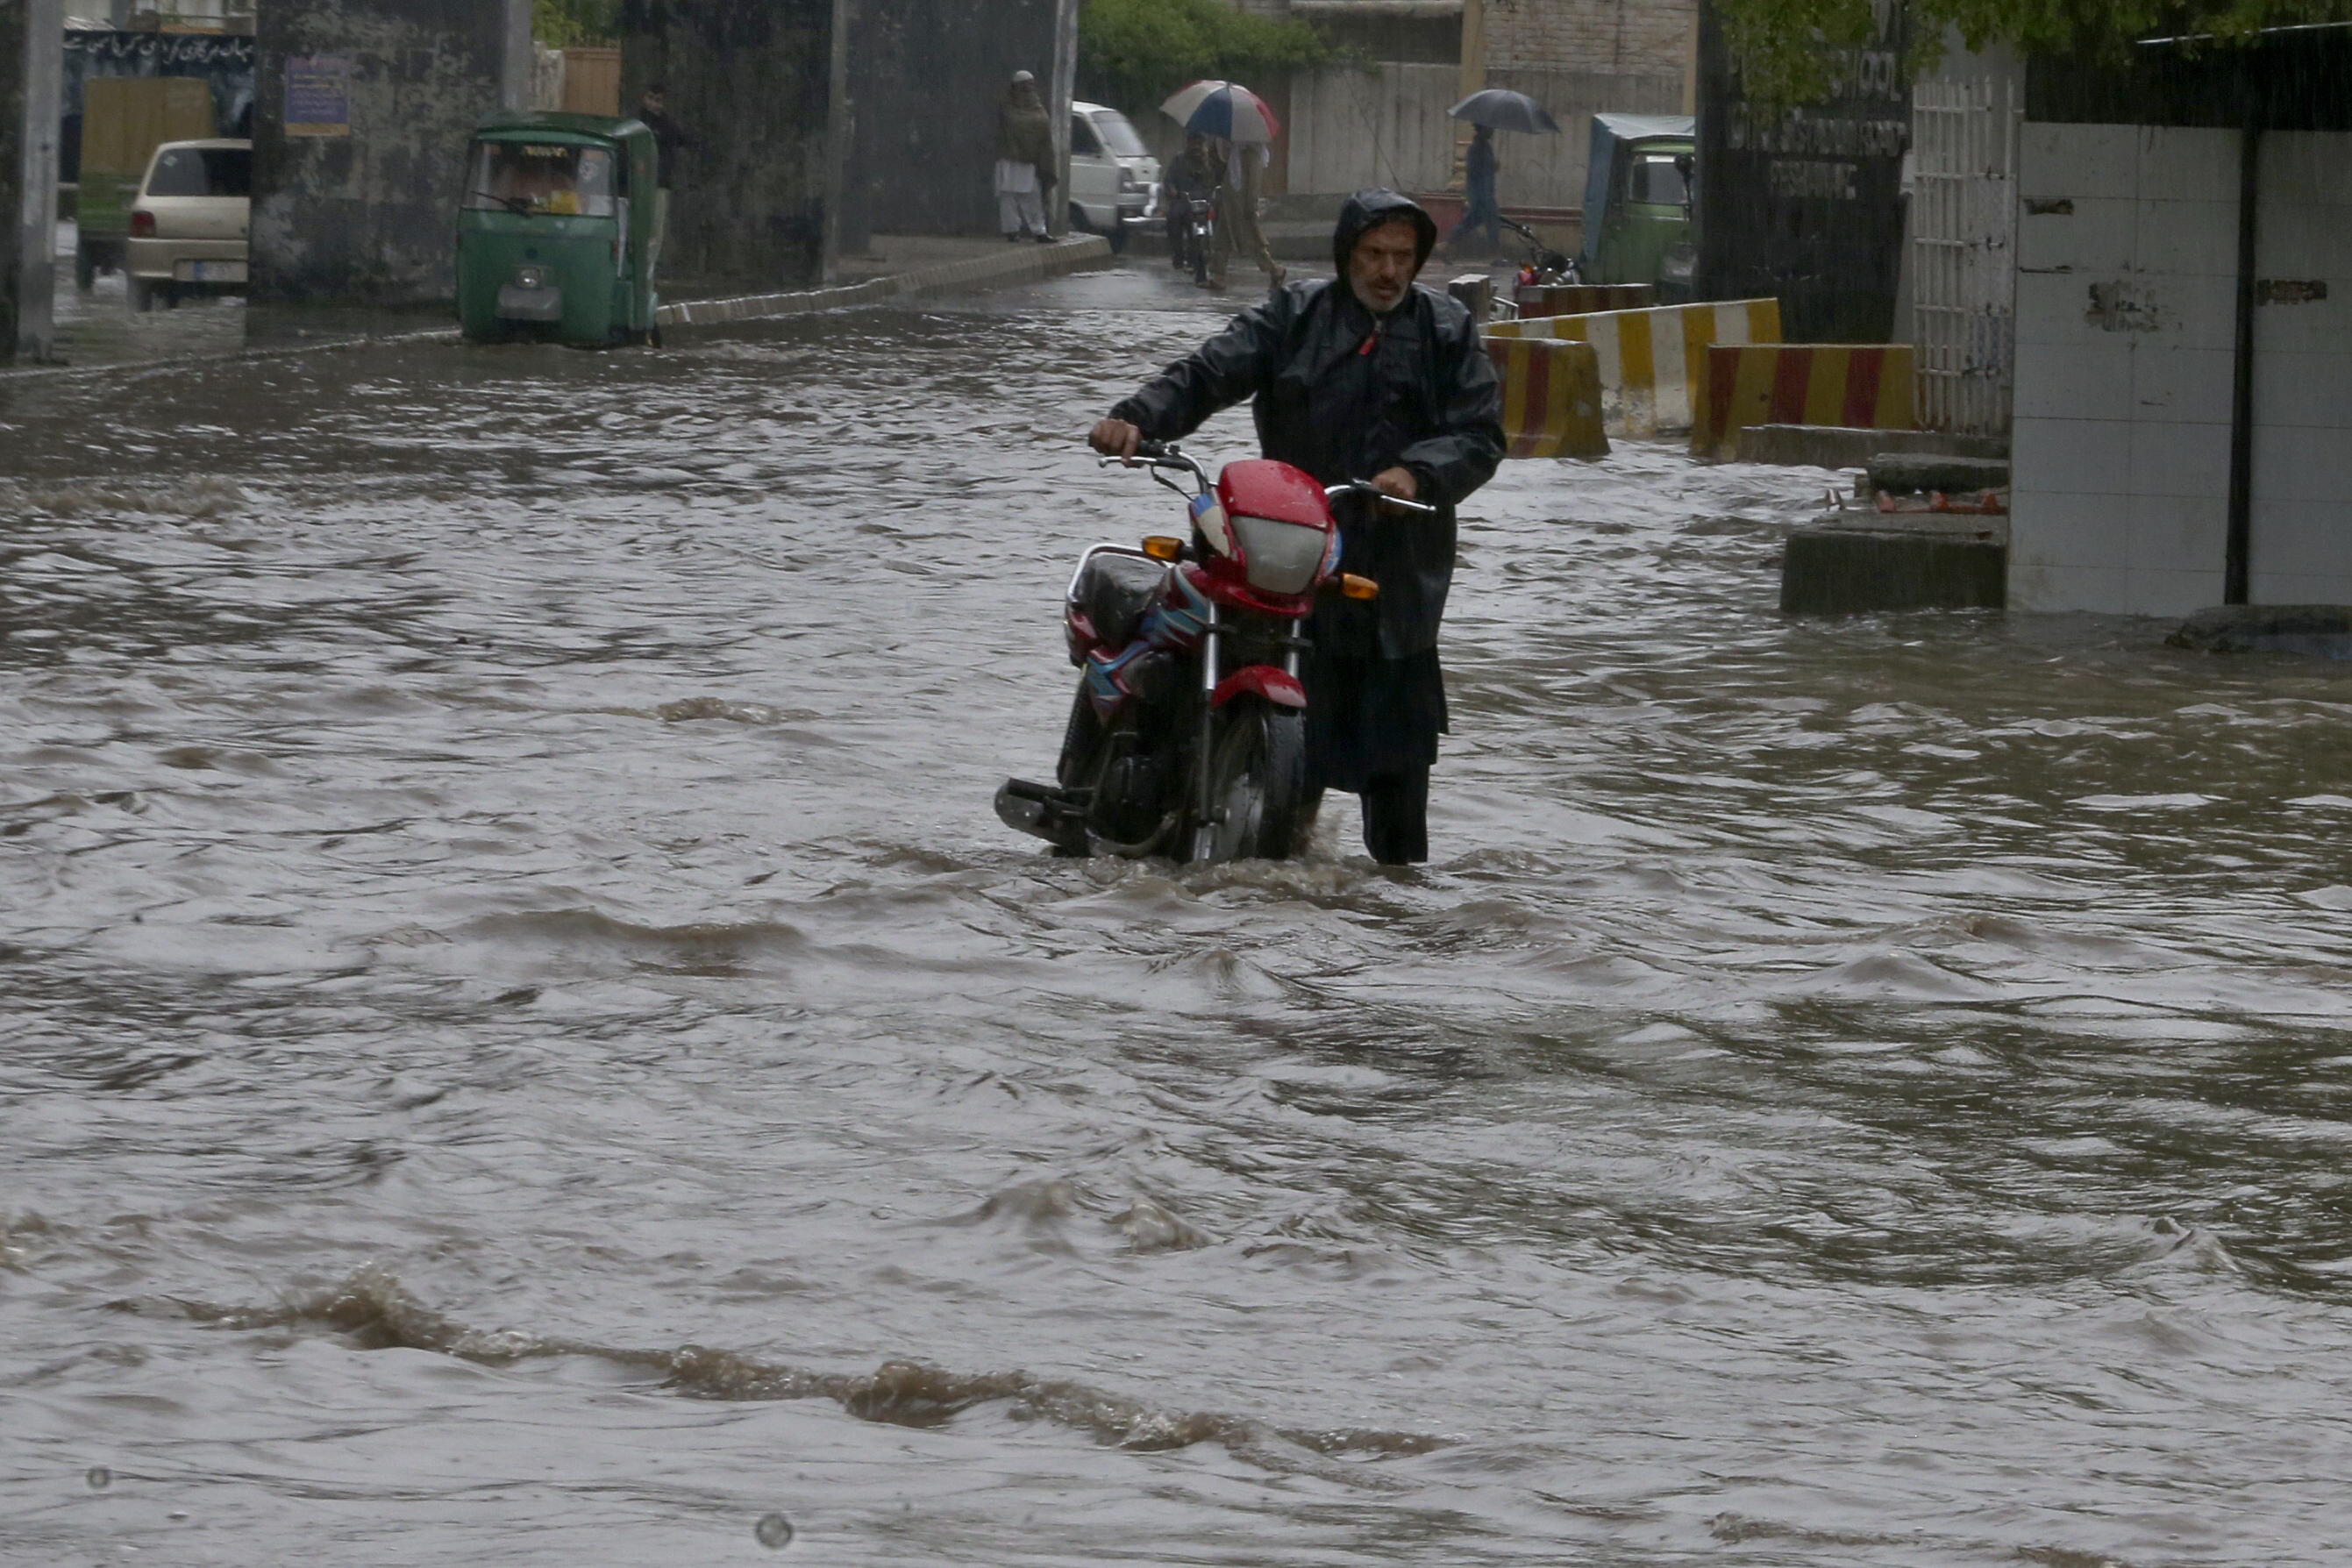 A Pakistani with his bike wades through a flooded road caused by heavy rain in Peshawar, Pakistan, Monday, April 15, 2024. Lightening and heavy rains killed dozens of people, mostly farmers, across Pakistan in the past three days, officials said Monday, as authorities declared a state of emergency in the country's southwest following an overnight rainfall to avoid any further casualties and damages